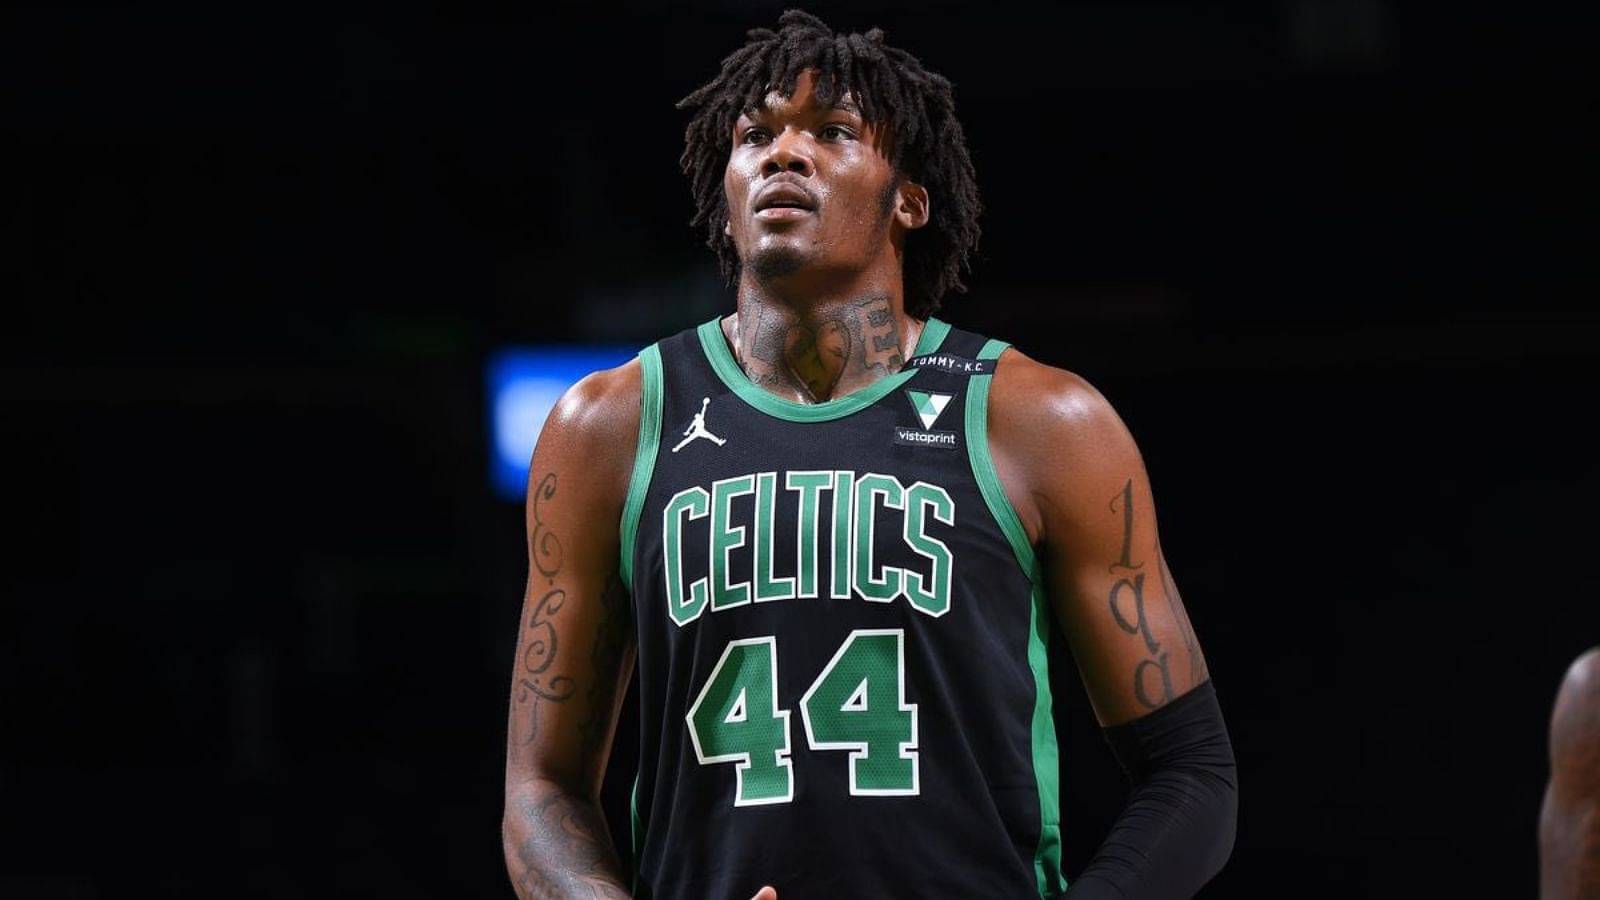 “Celtics were +30 against Warriors when Robert Williams III was on court”: NBA Reddit is full of praise for the Boston big man calls him ‘The Absolute Game Changer’